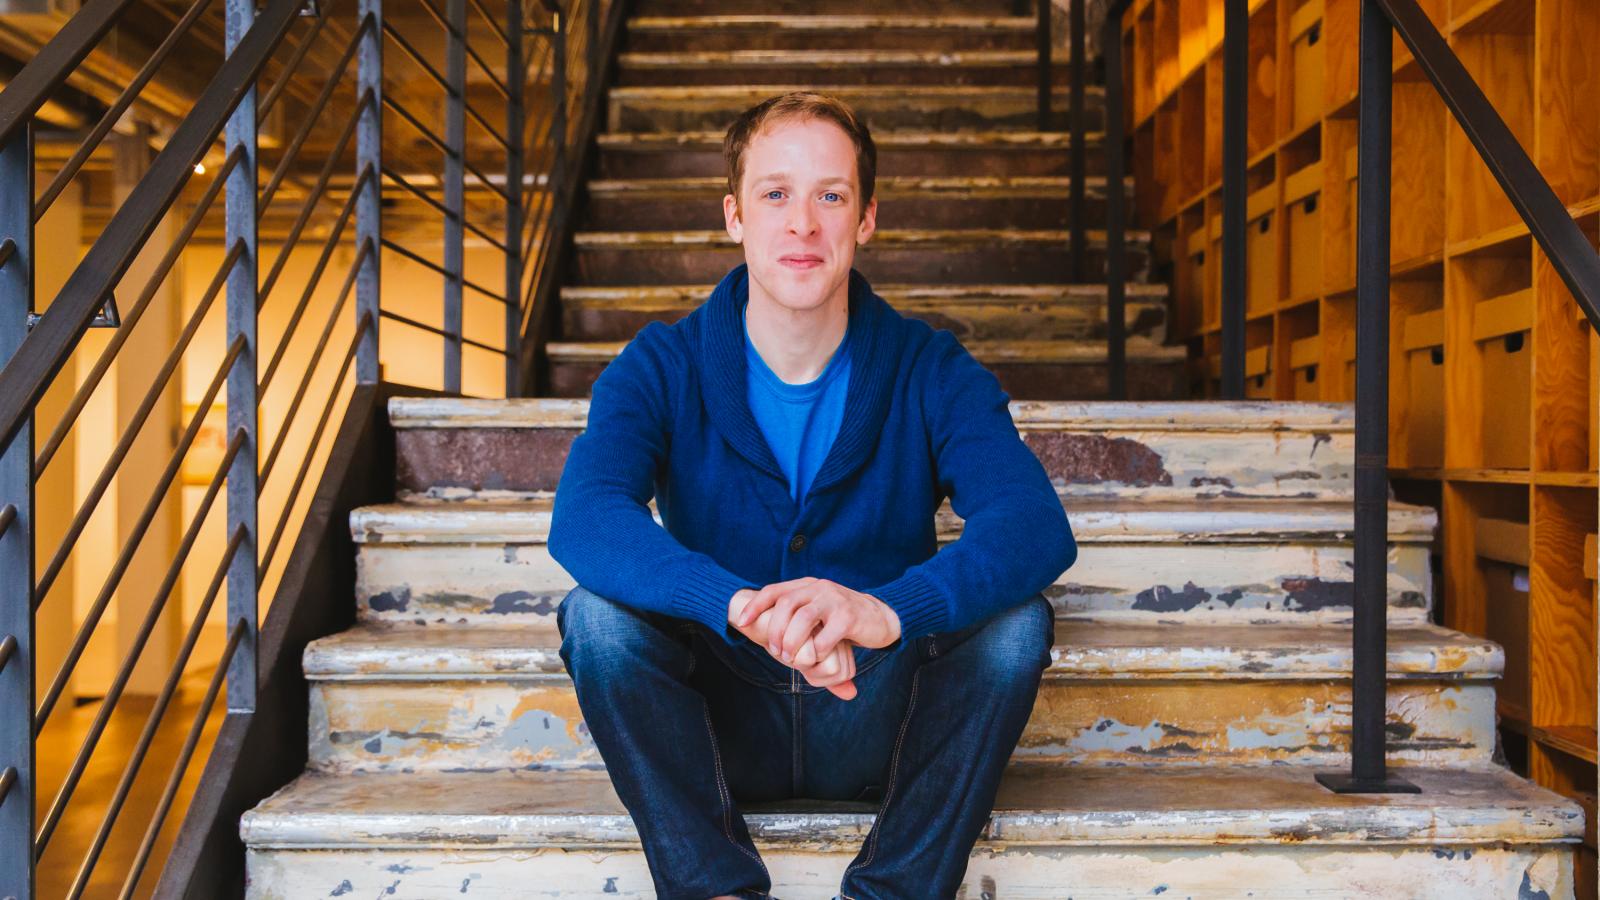 Man in blue shirt sitting on steps and looking at camera